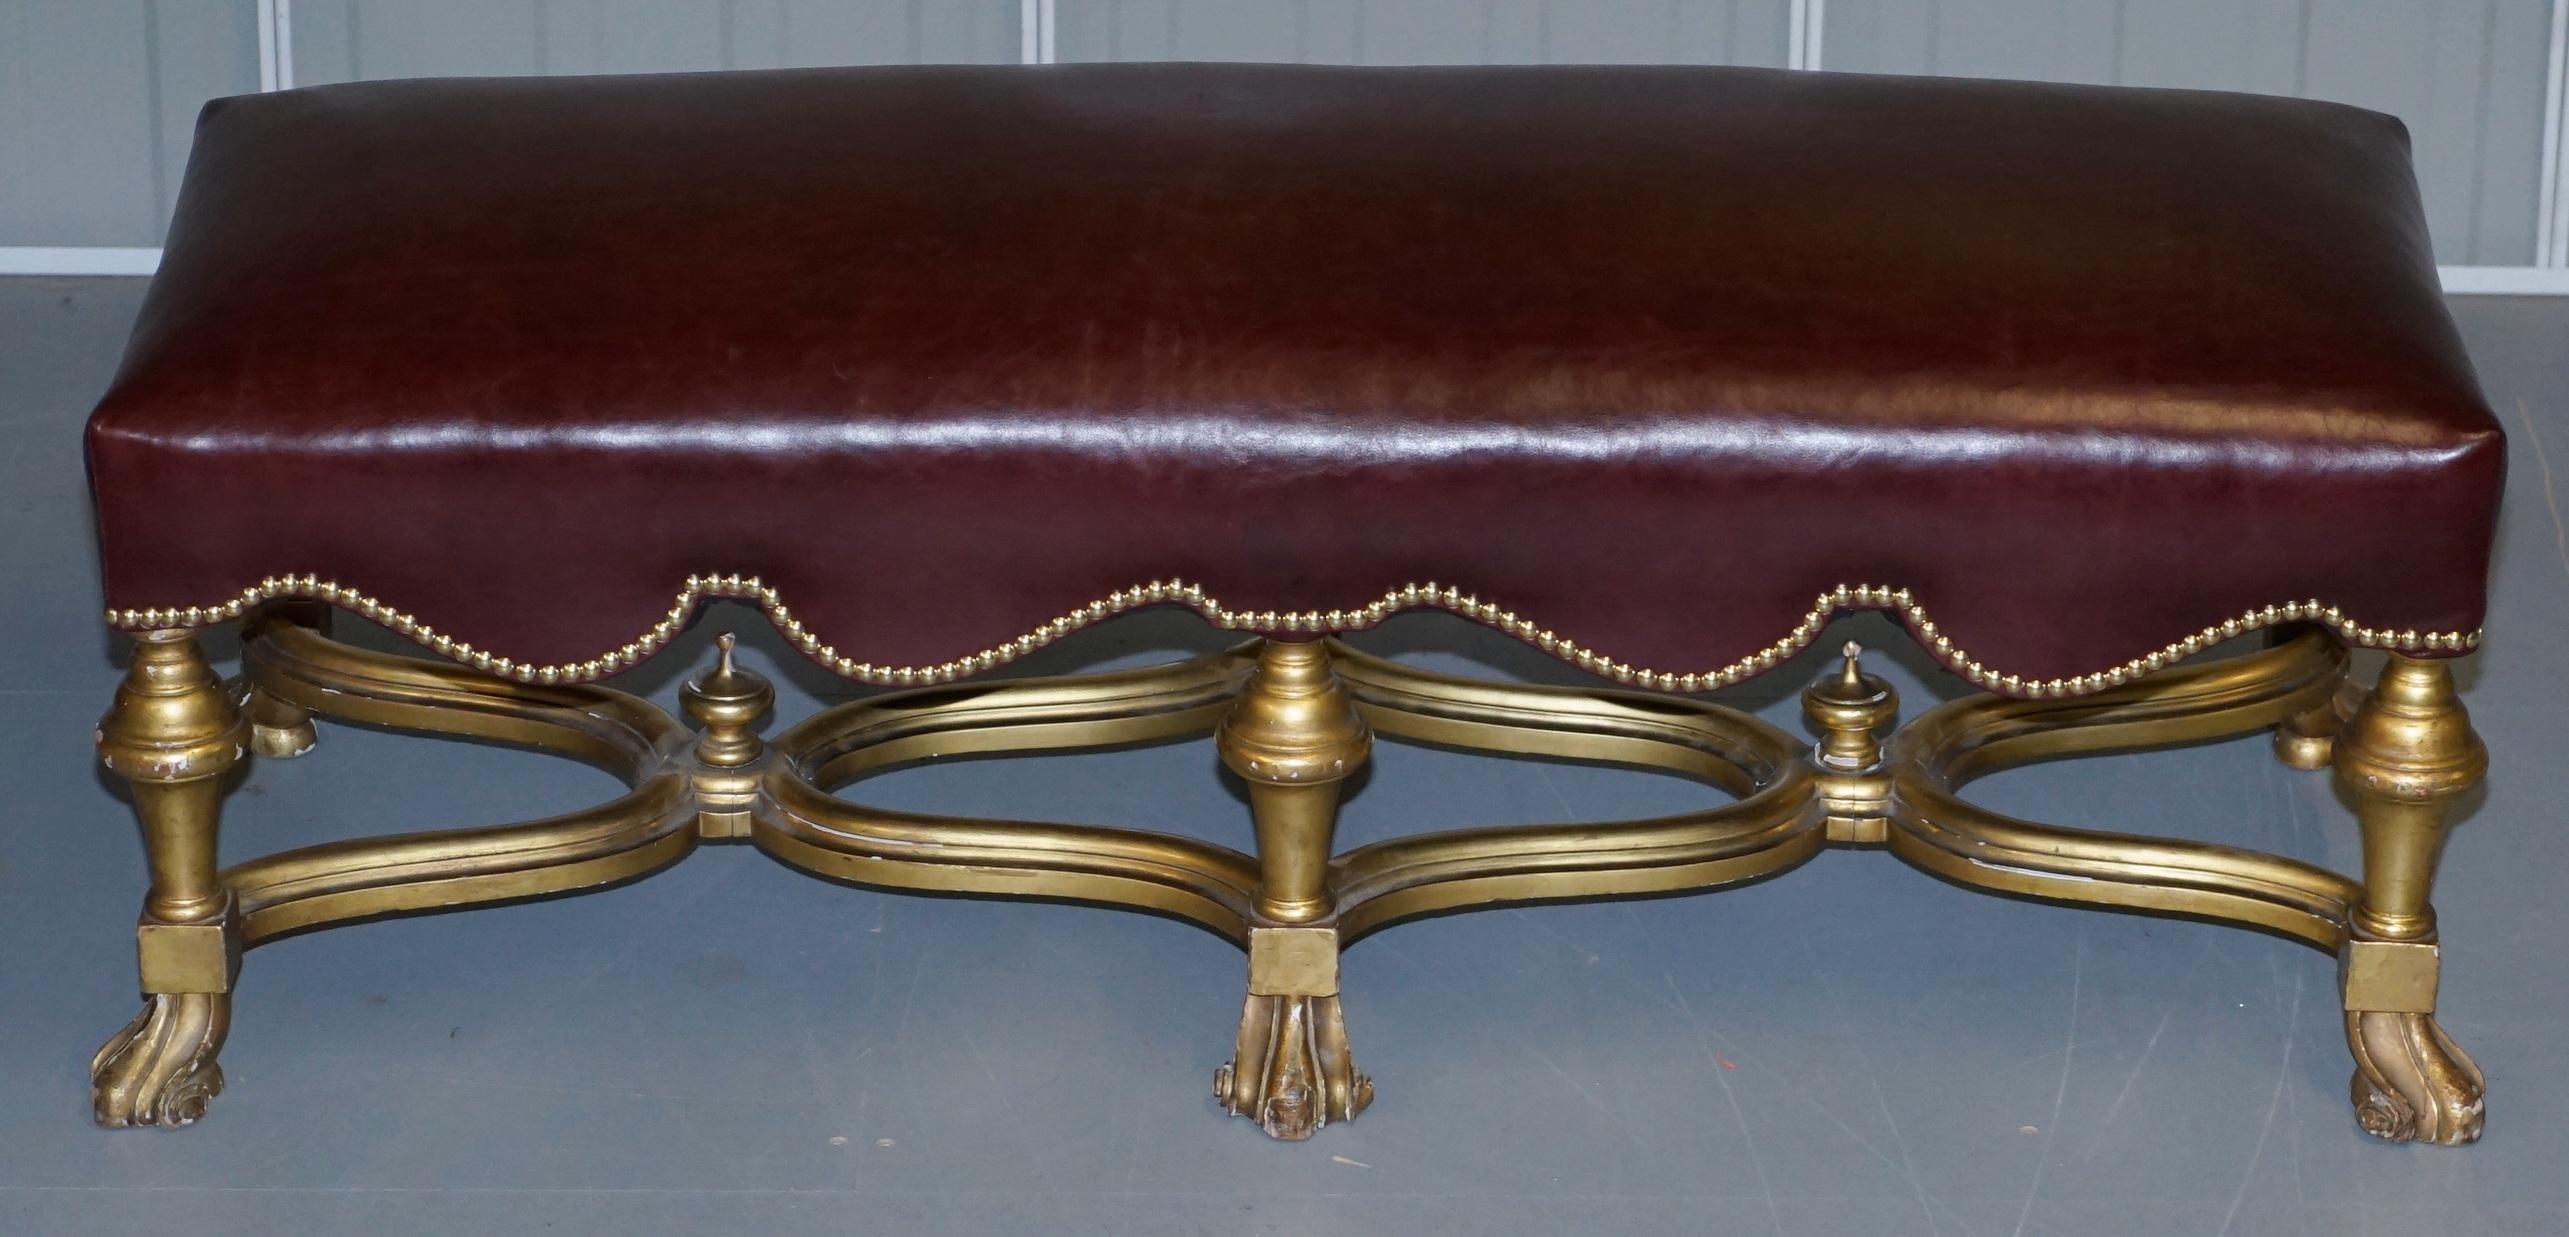 We are delighted to offer for sale this absolutely stunning Italian giltwood Baroque style bench stool with newly upholstered heritage oxblood leather top

This stool is sublime… The pictures don’t come close to doing it justice, this is fine